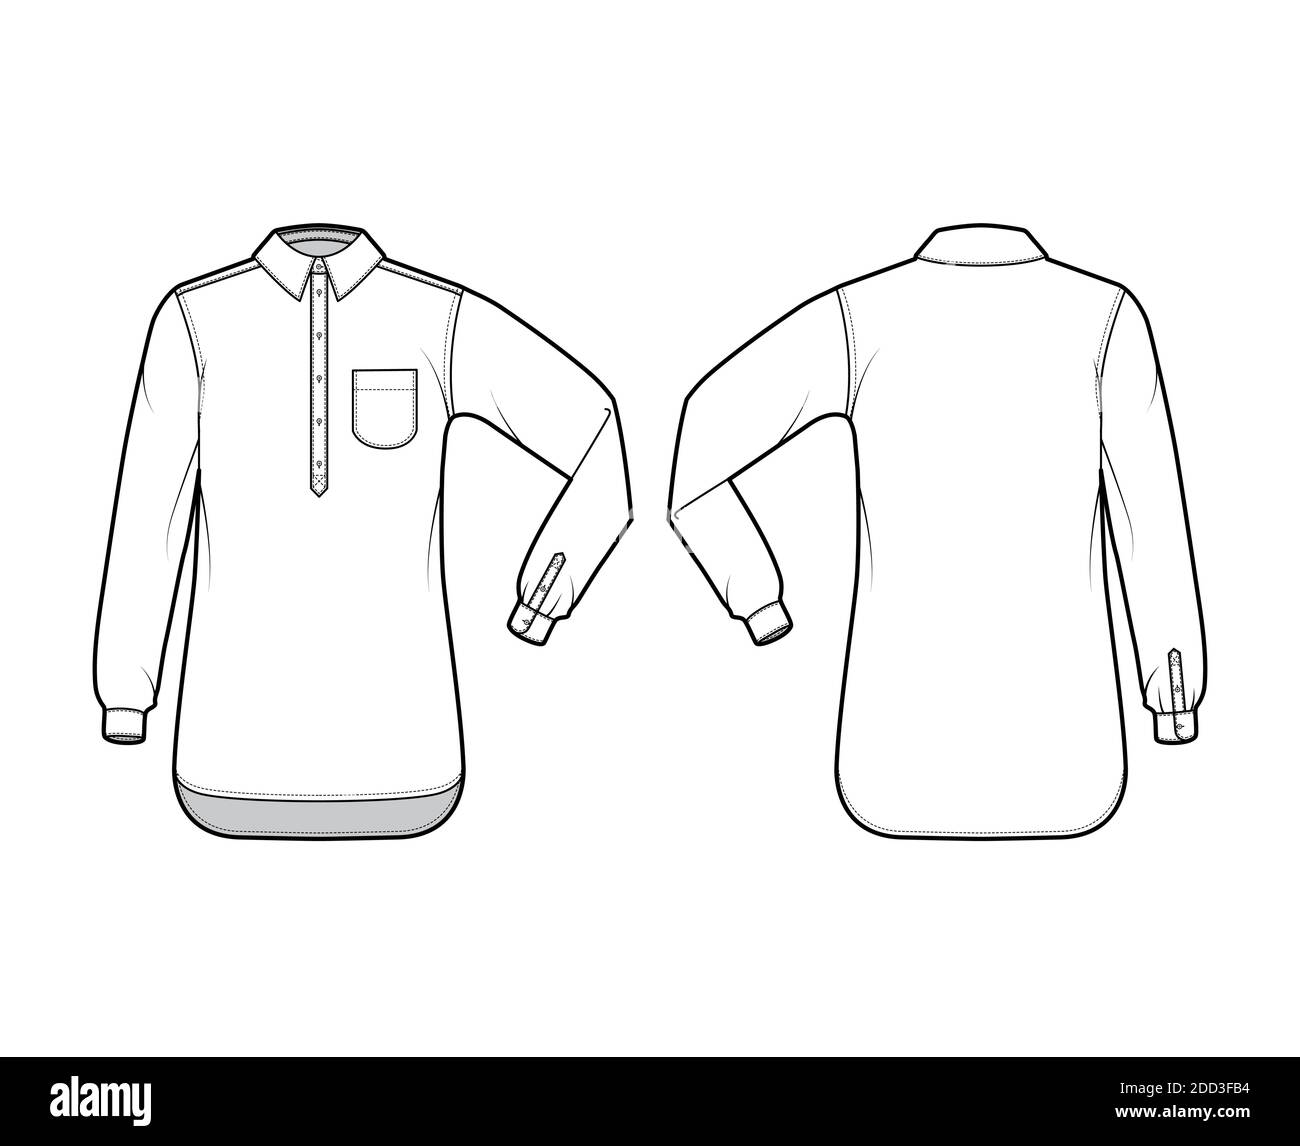 Shirt pullover technical fashion illustration with rounded pocket, elbow fold long sleeve, oversized, half placket button down. Flat template front, back white color. Women men top CAD mockup Stock Vector